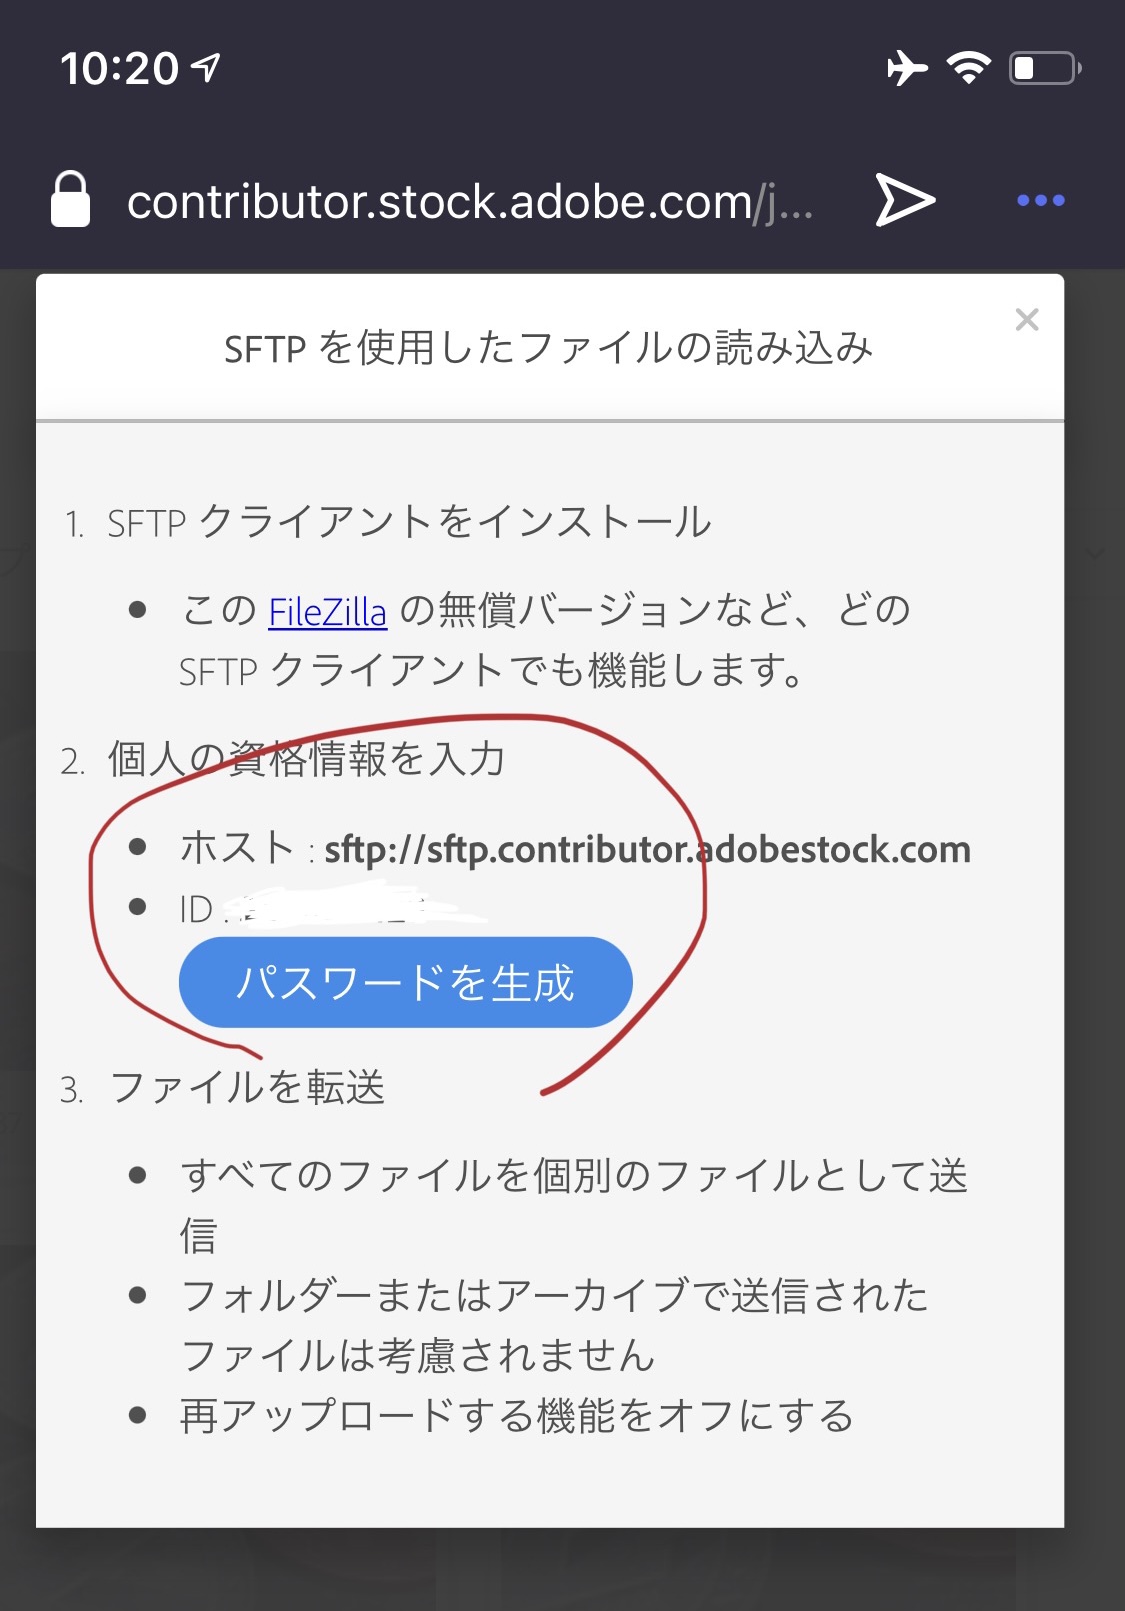 How to change setting of FTP to SFTP on Adobe Stock Contributor with iOS App FTP Manager Pro